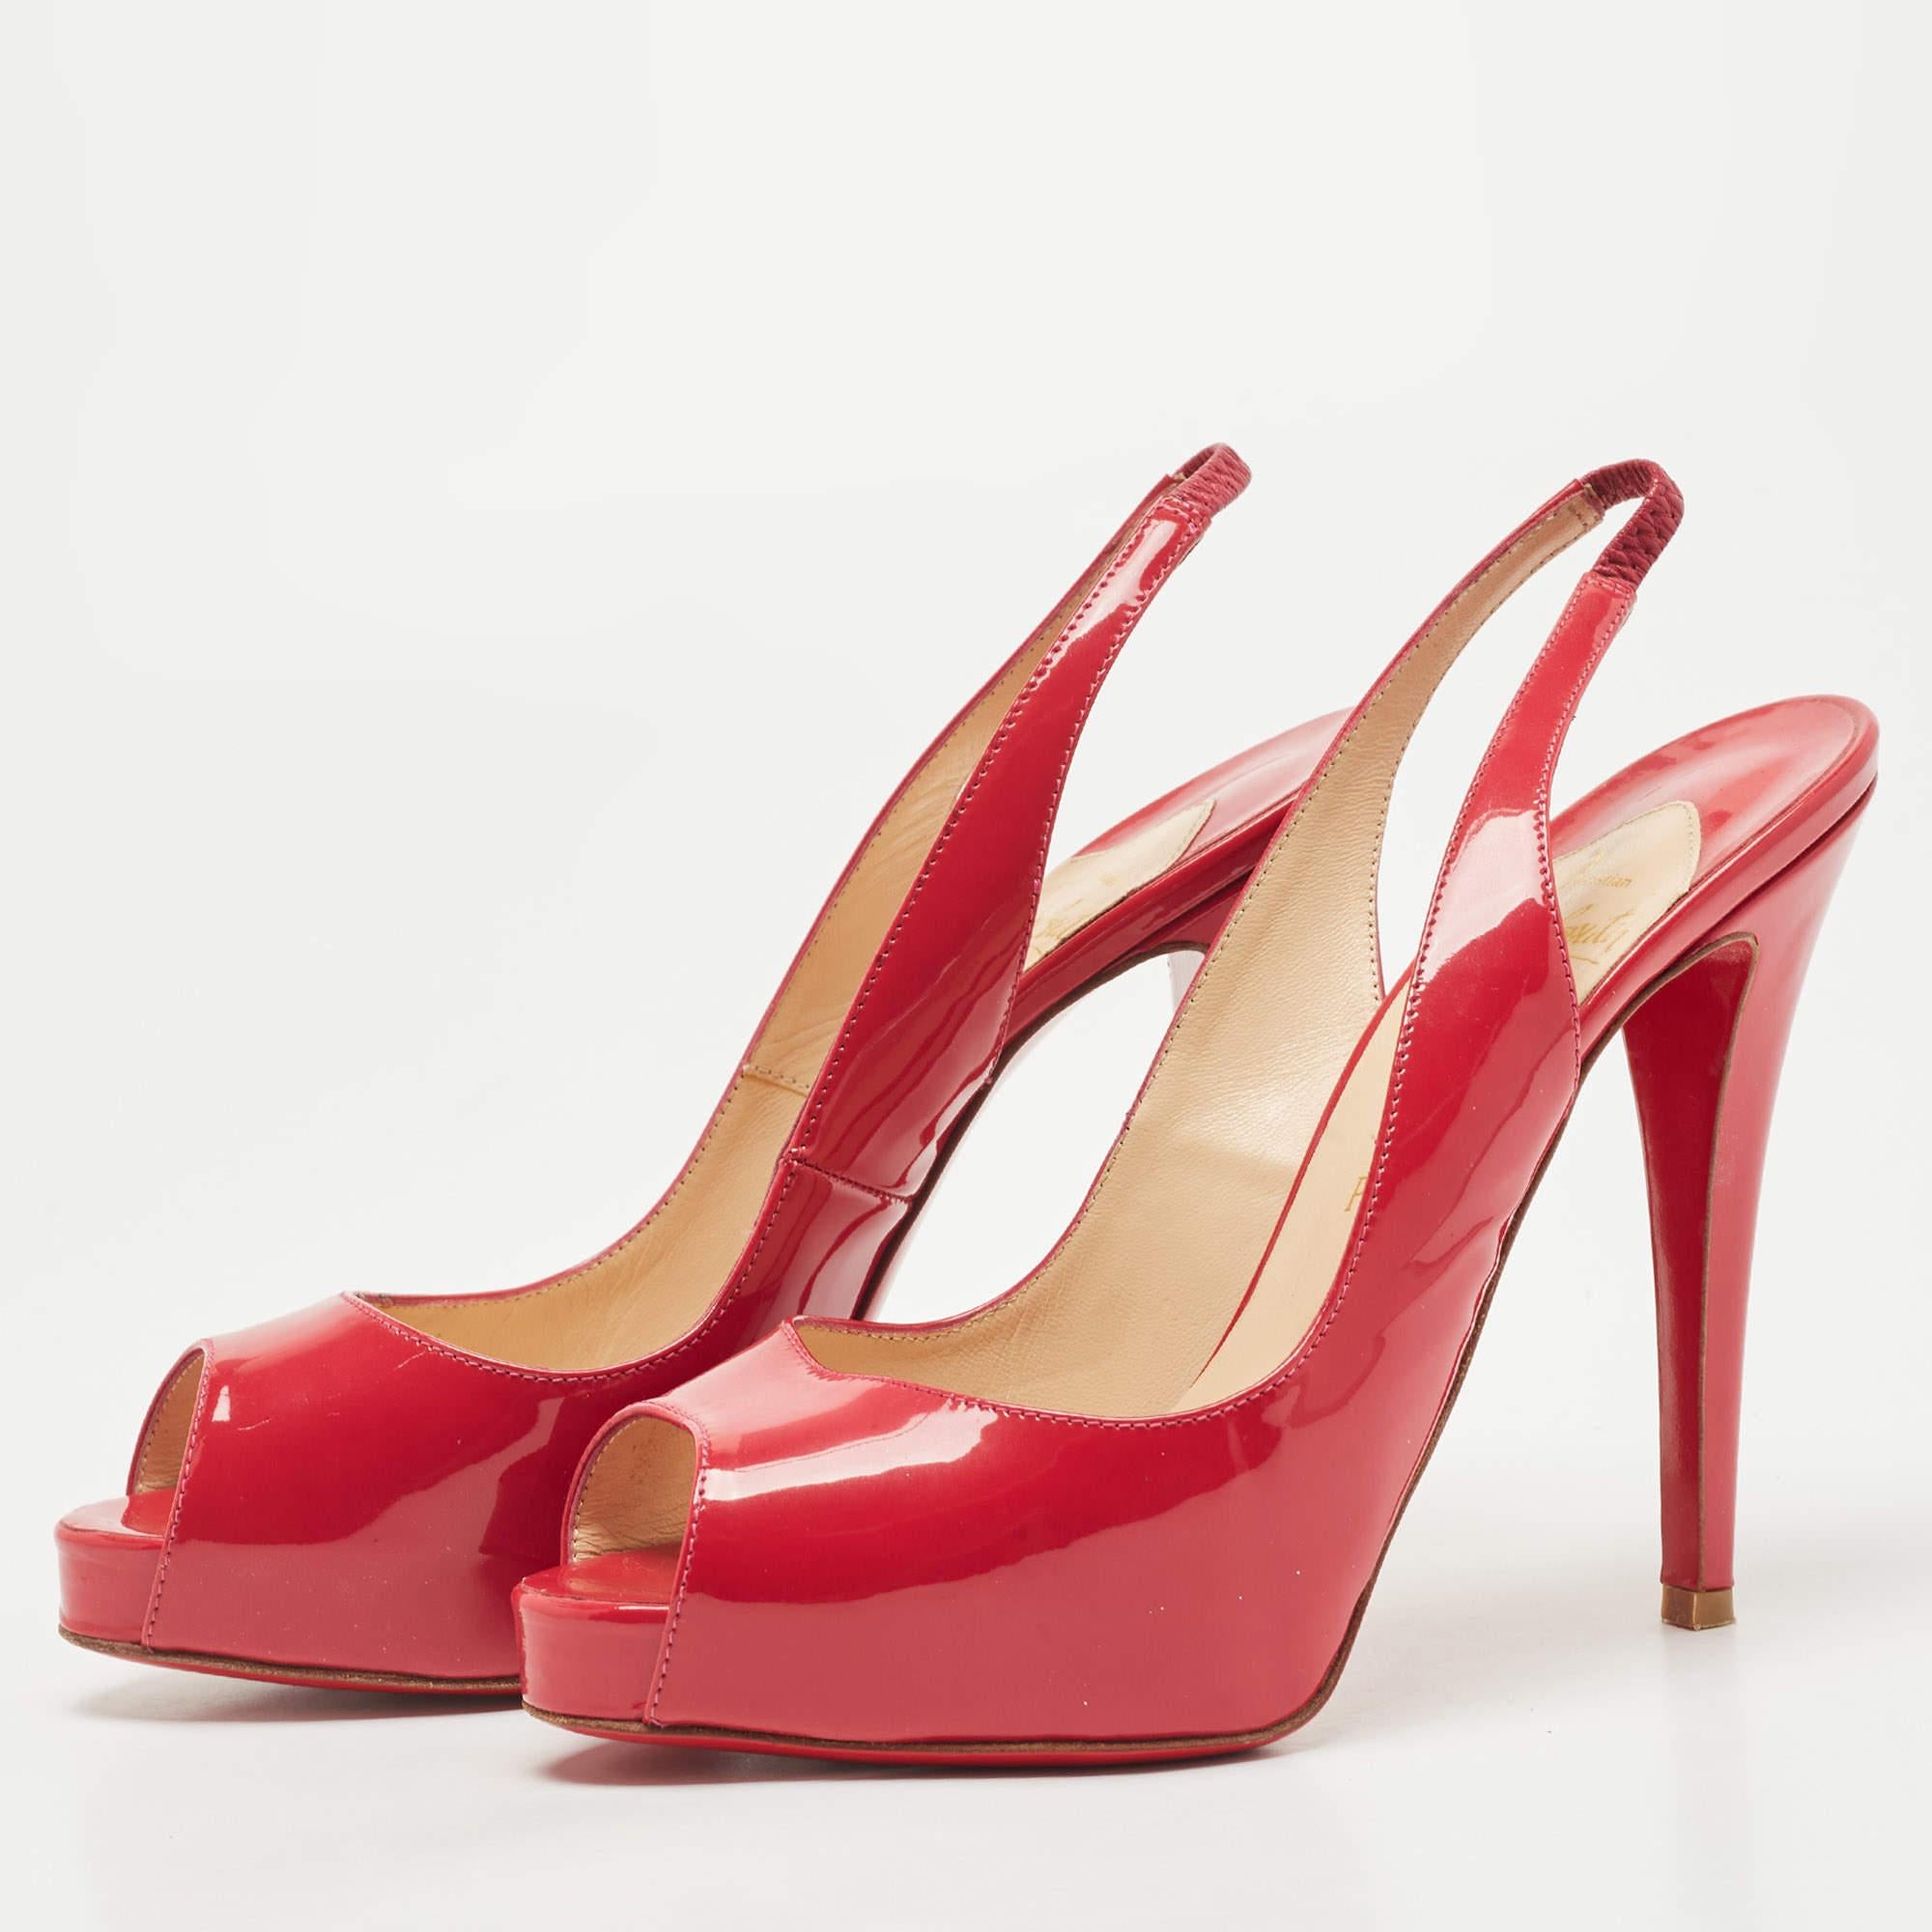 This pair of Christian Louboutin pumps infuse a touch of sophistication into your outfit. Constructed from patent leather, the expertly placed cuts and the sleek heels signify the brand's expertise in creating impressive designs. The signature